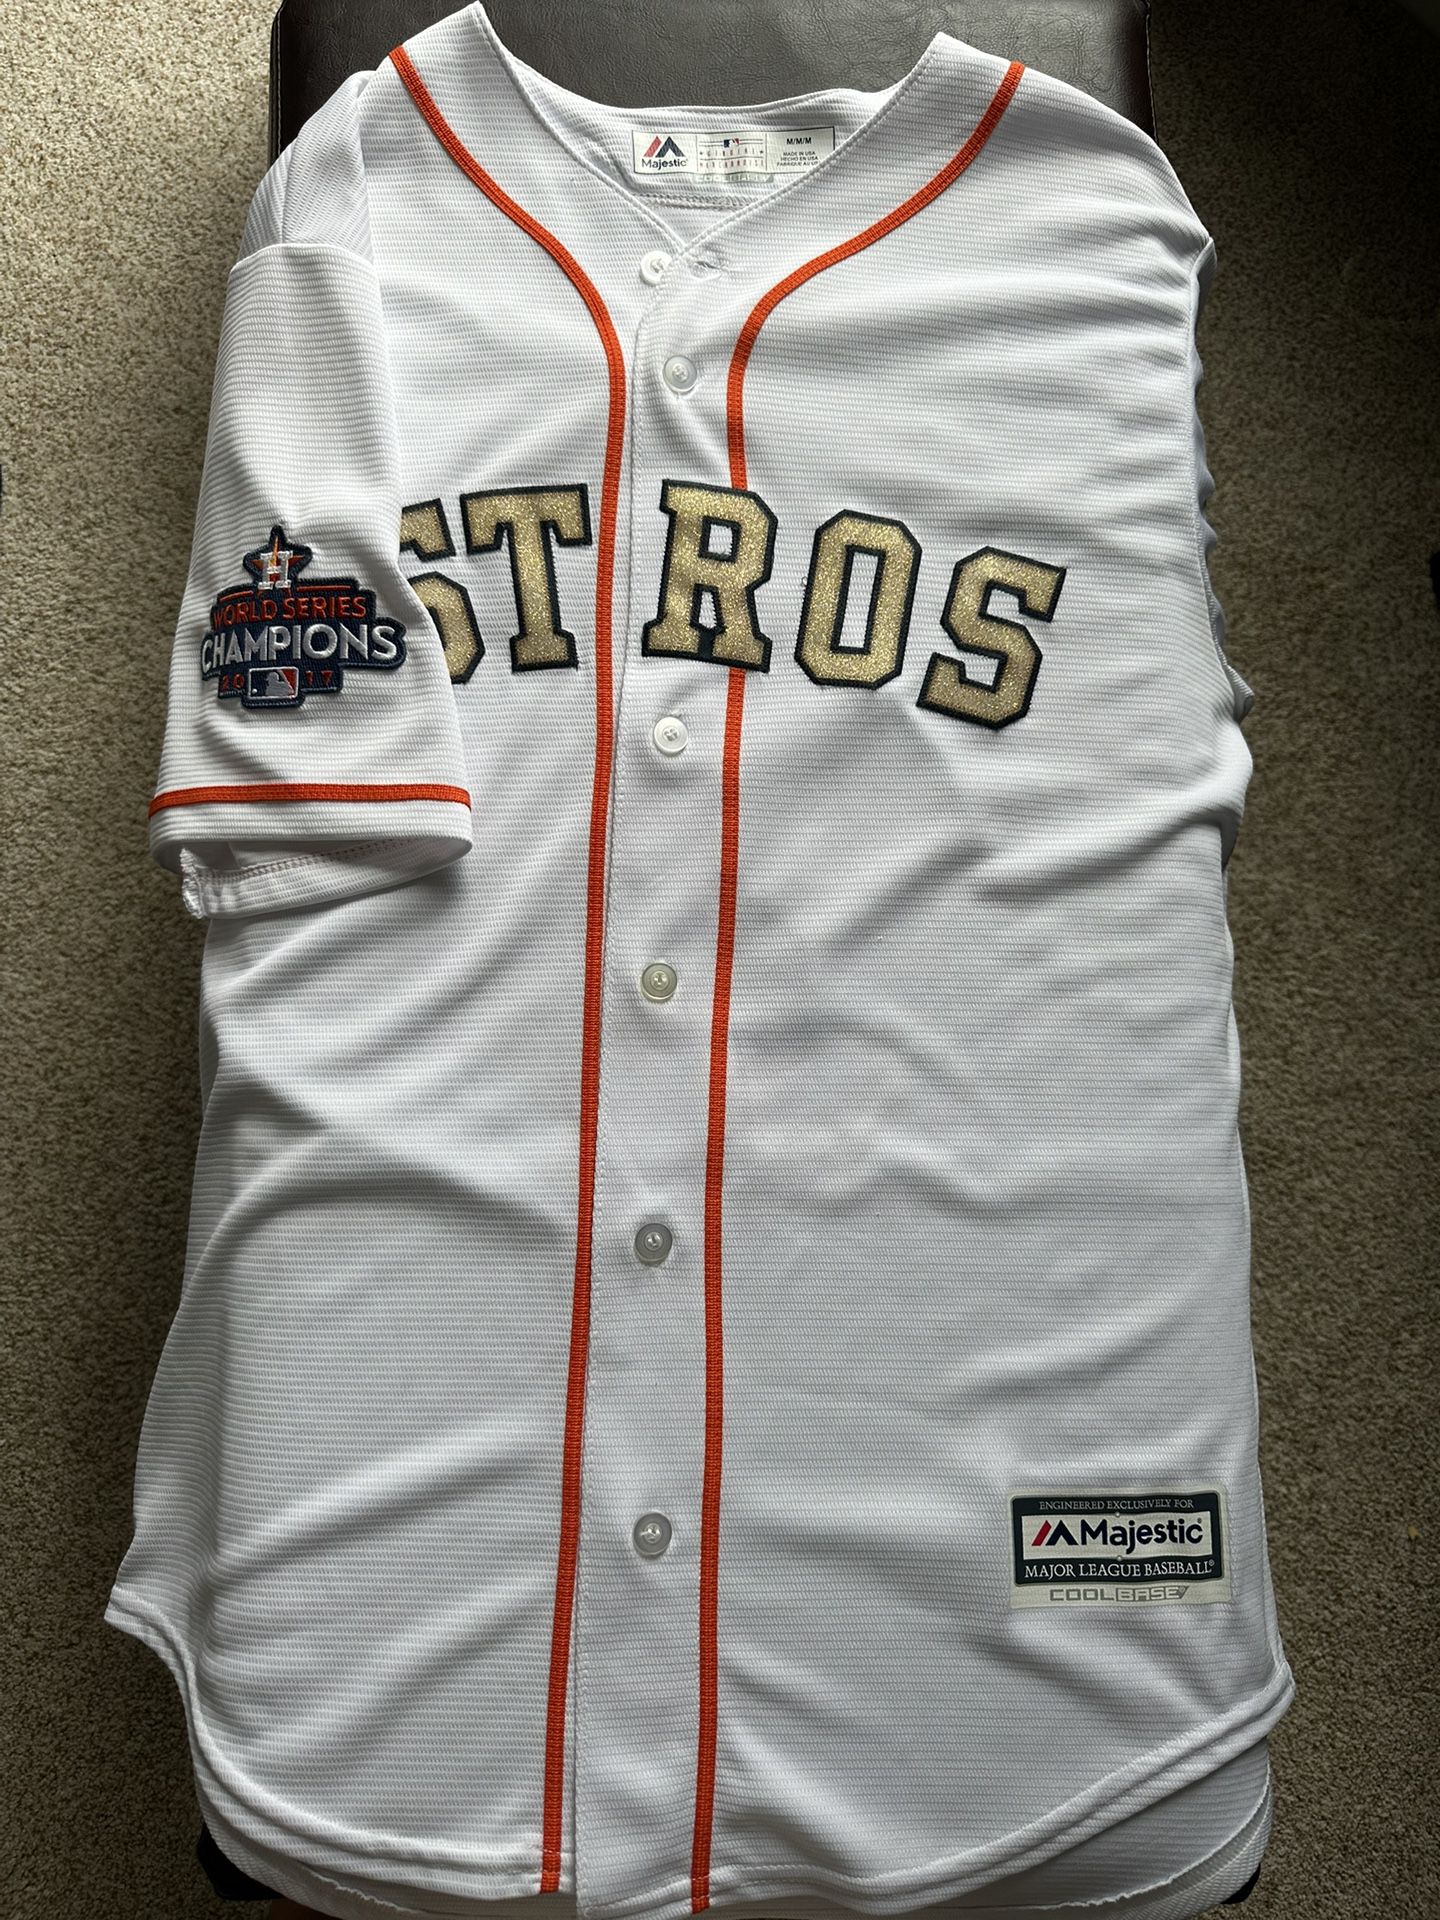 Astros 2017 World Series Championship Jersey for Sale in Denver, CO -  OfferUp